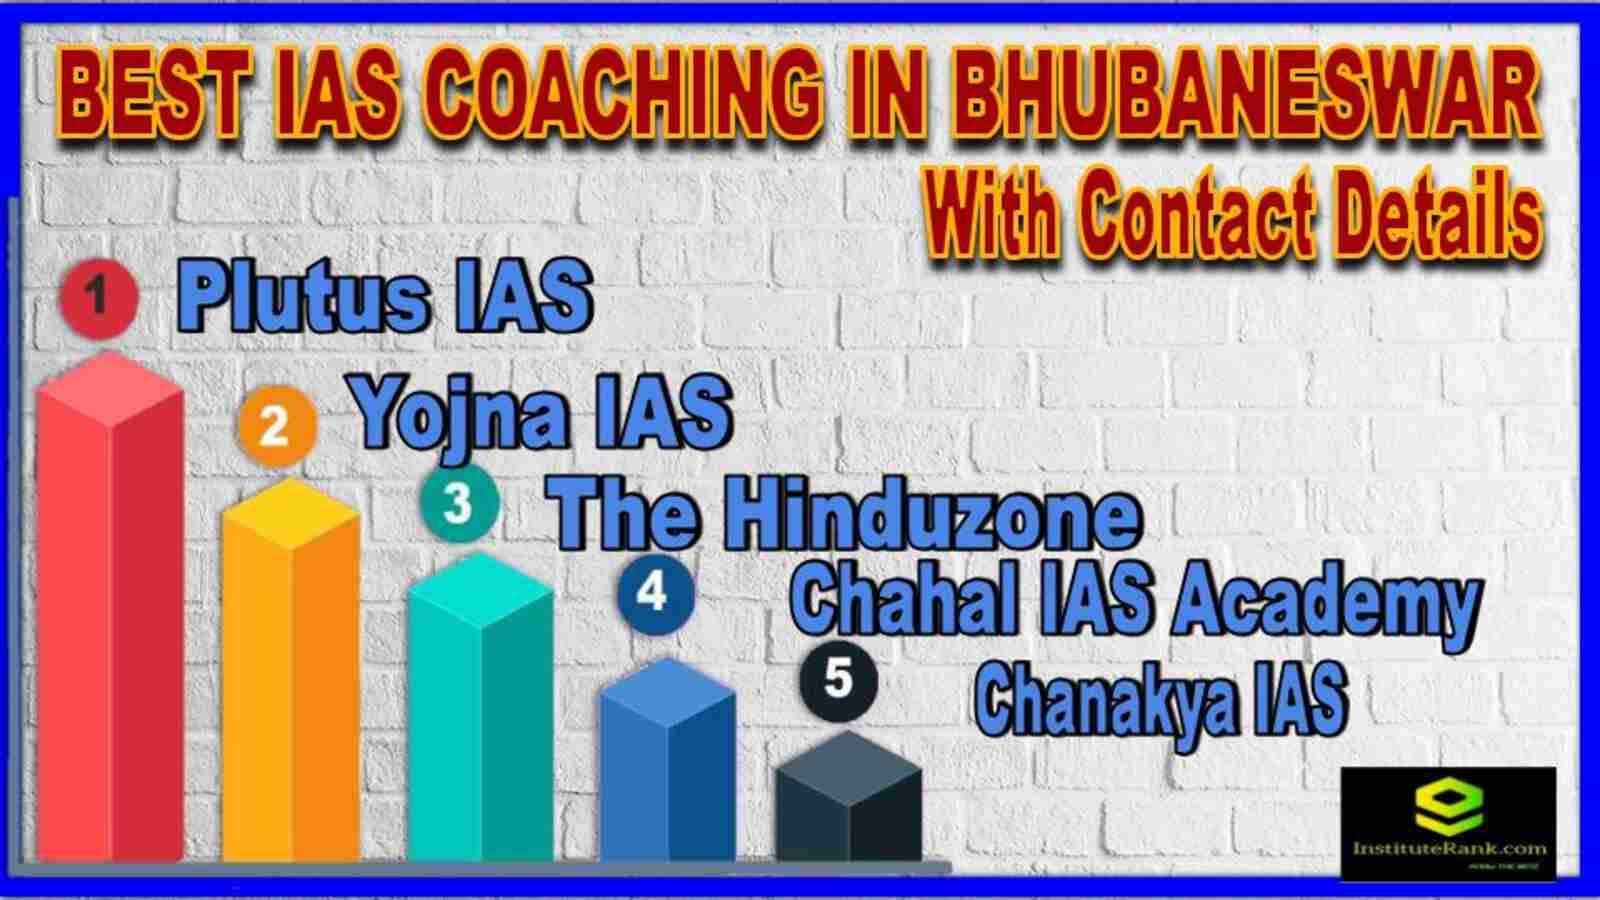 Best IAS Coaching in Bhubaneswar with Contact Details